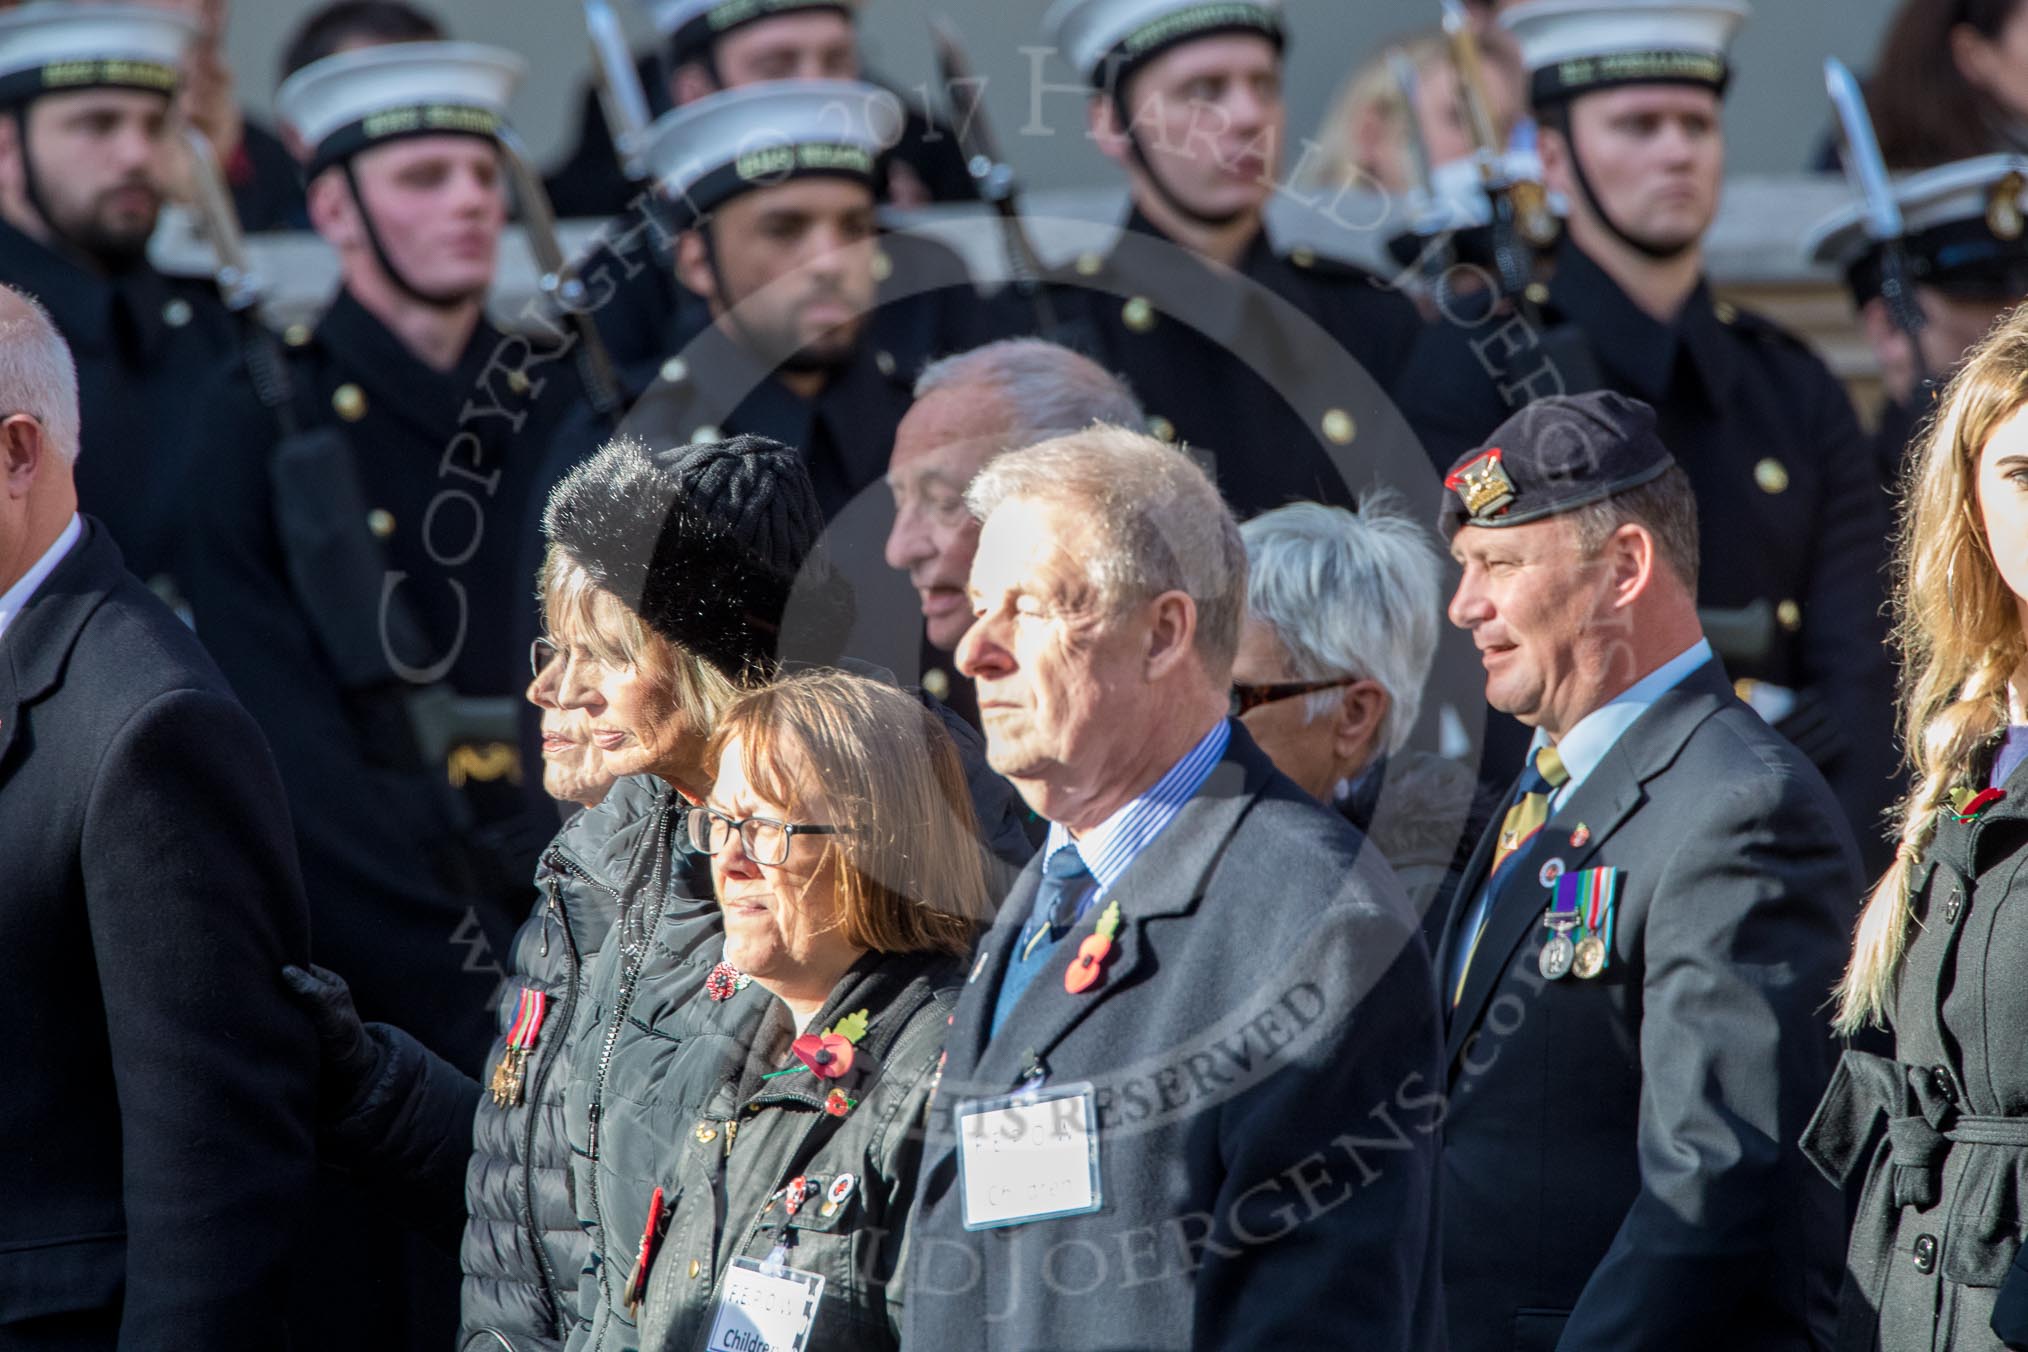 Children (and Families) of Far East Prisoners of War (Group M2, 59 members) during the Royal British Legion March Past on Remembrance Sunday at the Cenotaph, Whitehall, Westminster, London, 11 November 2018, 12:25.